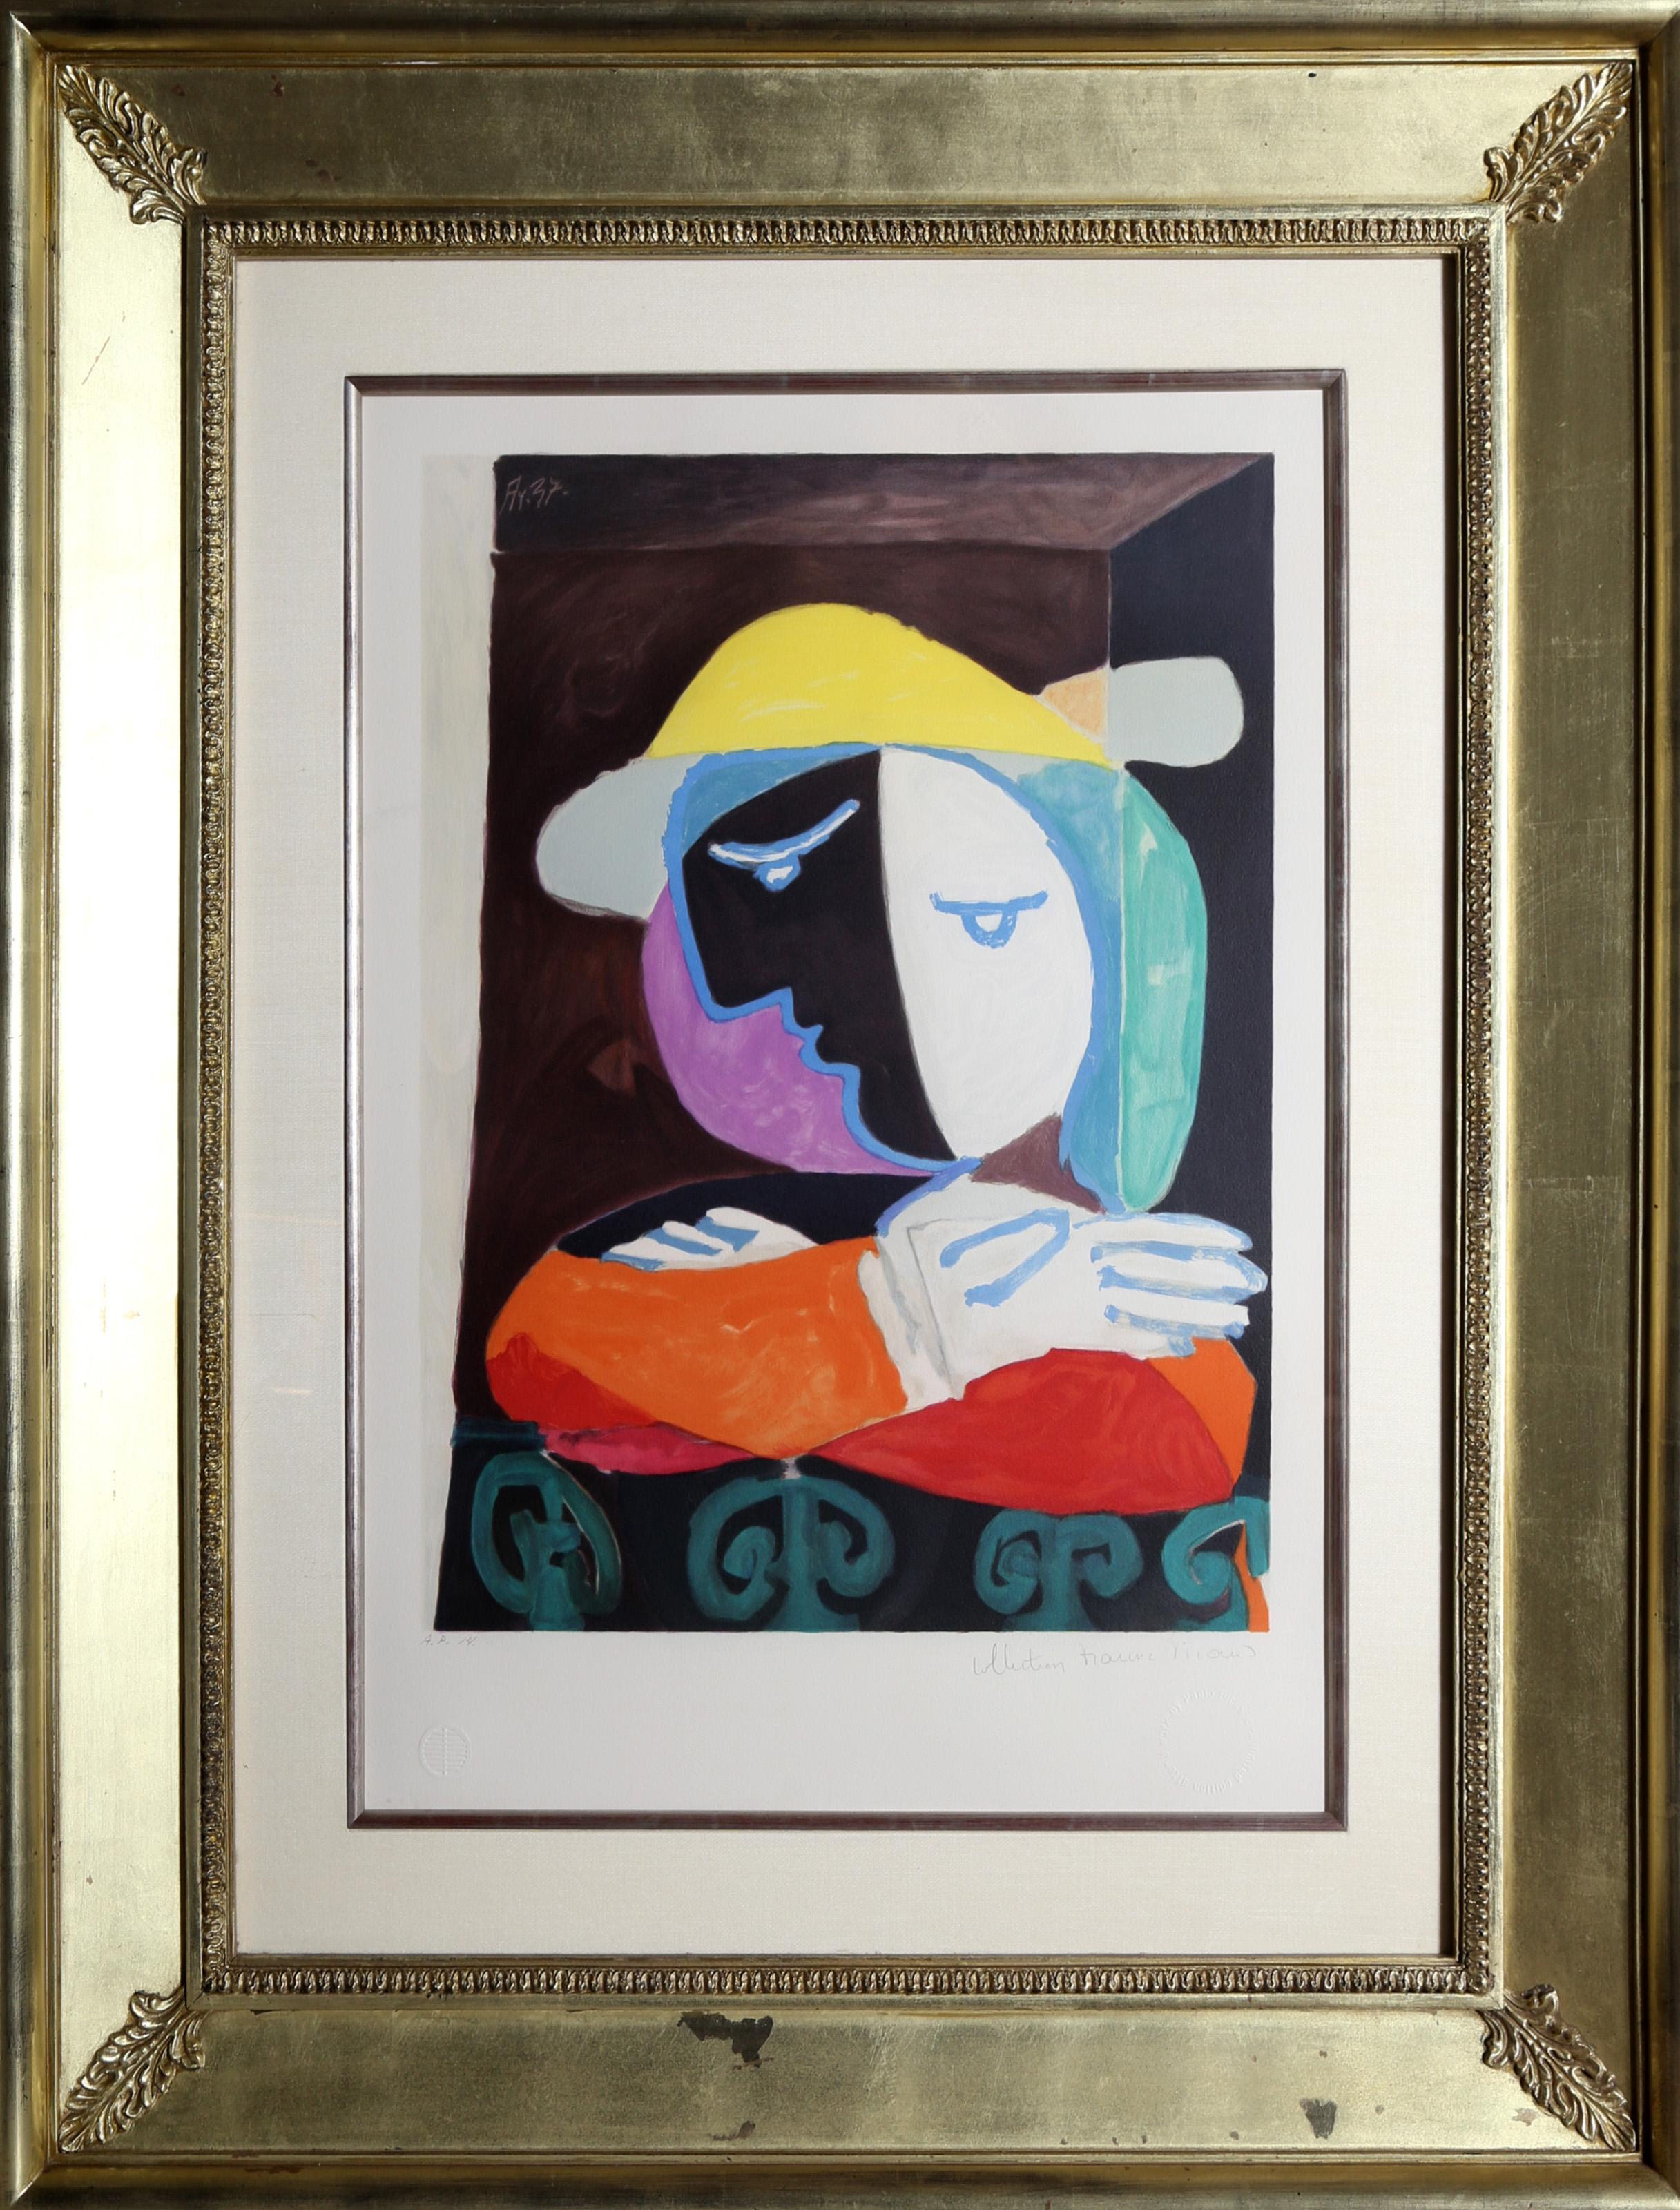 Leaning against the curved railing of the balcony, the model in this print is depicted through a series of shapes and forms of varying colors layered over one another. A typical example of Pablo Picasso’s work, this print demonstrates the artist’s